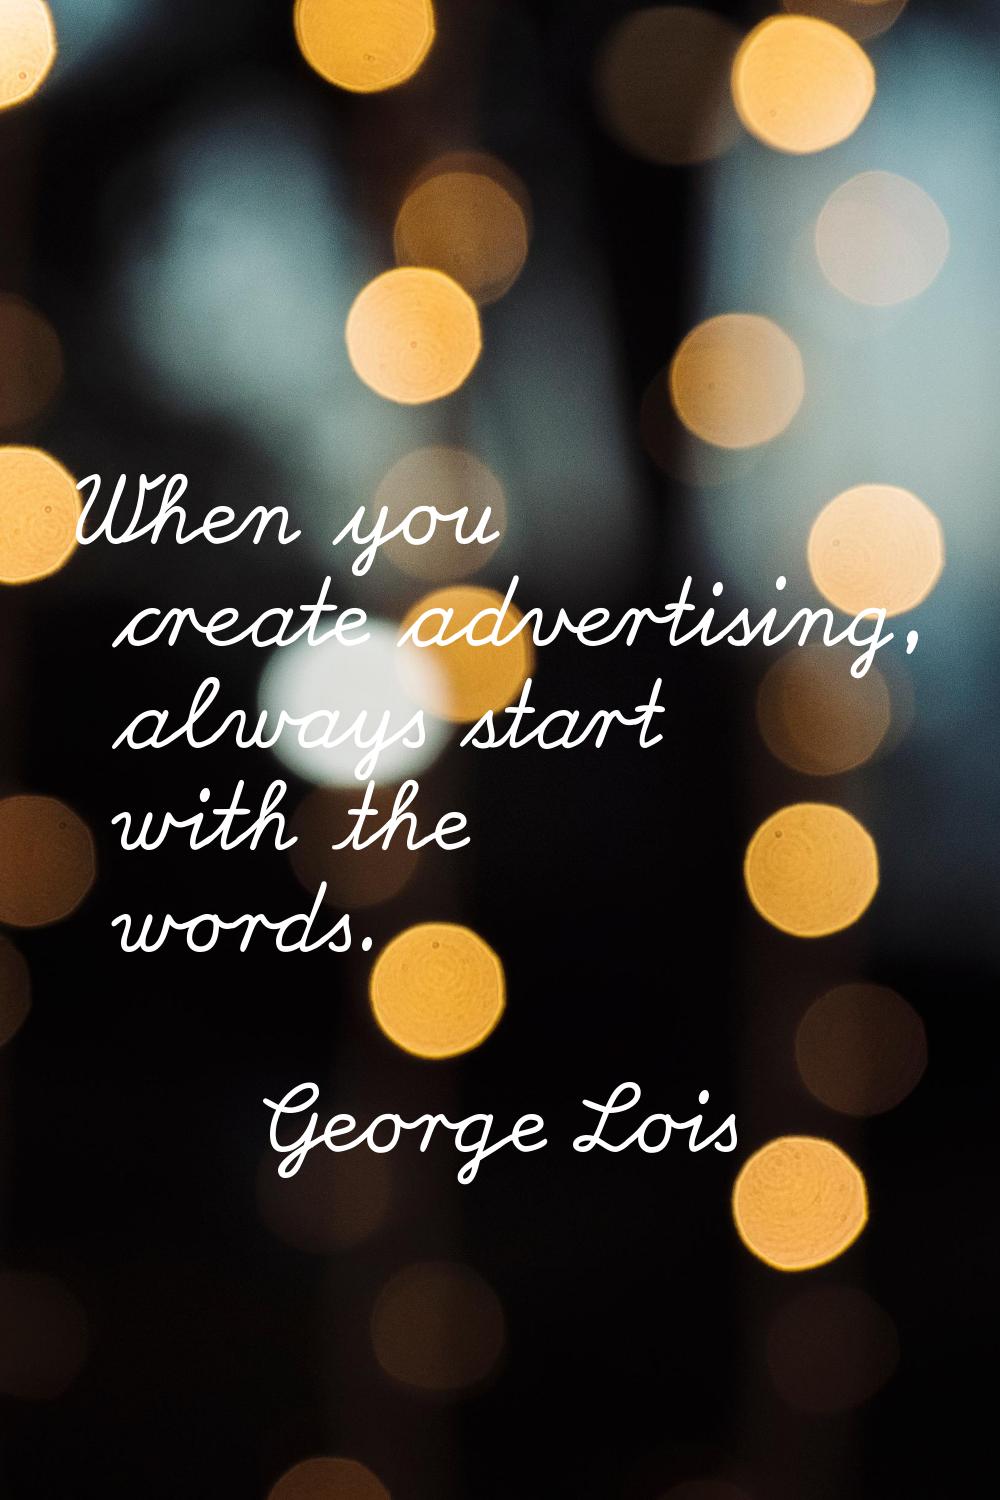 When you create advertising, always start with the words.